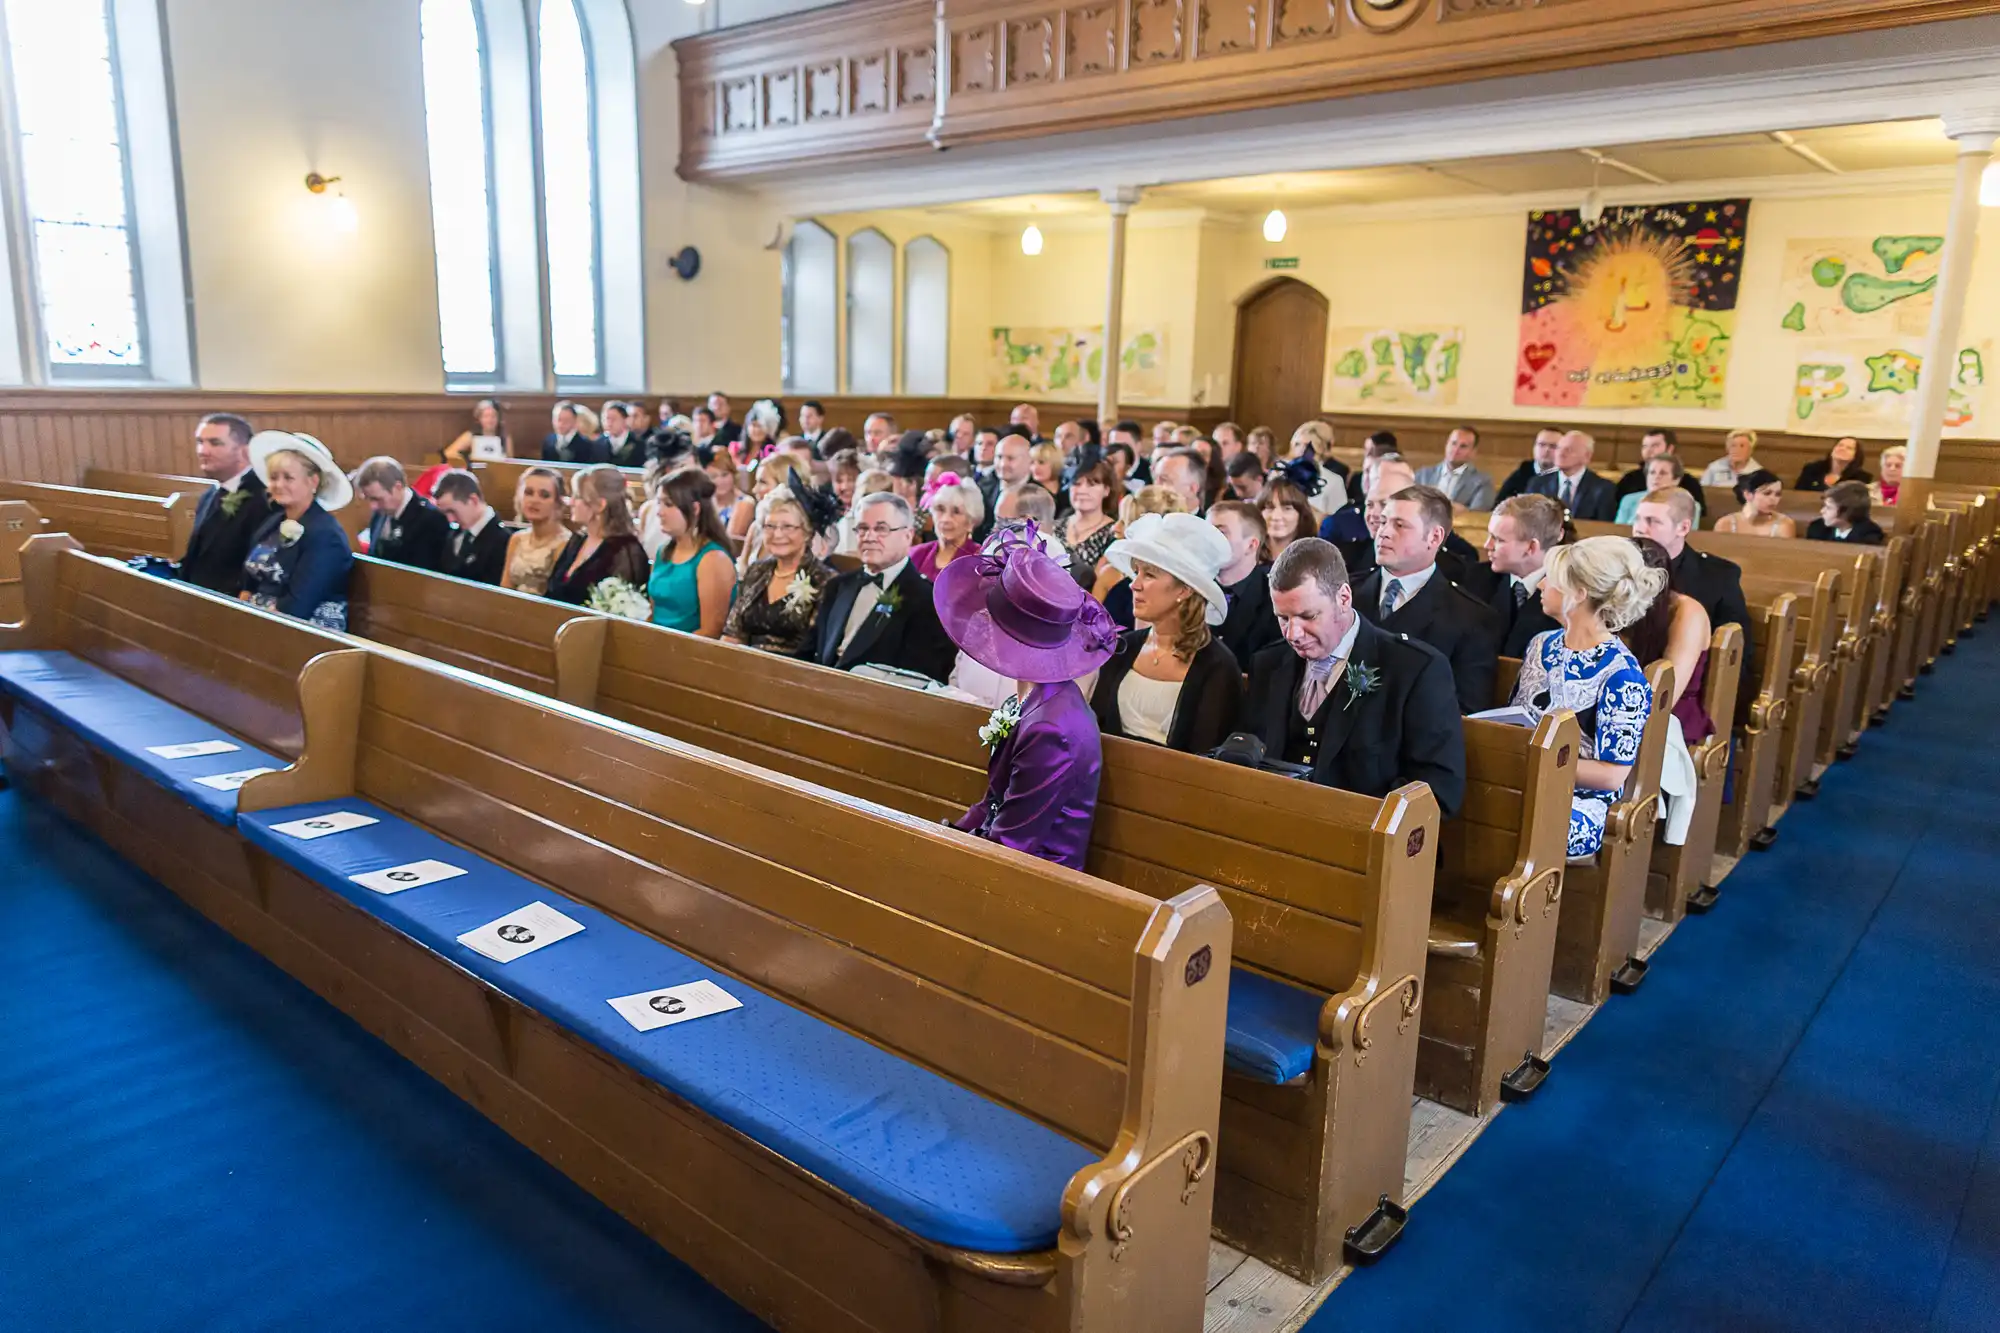 Guests seated in church pews during a wedding ceremony, dressed in formal attire.